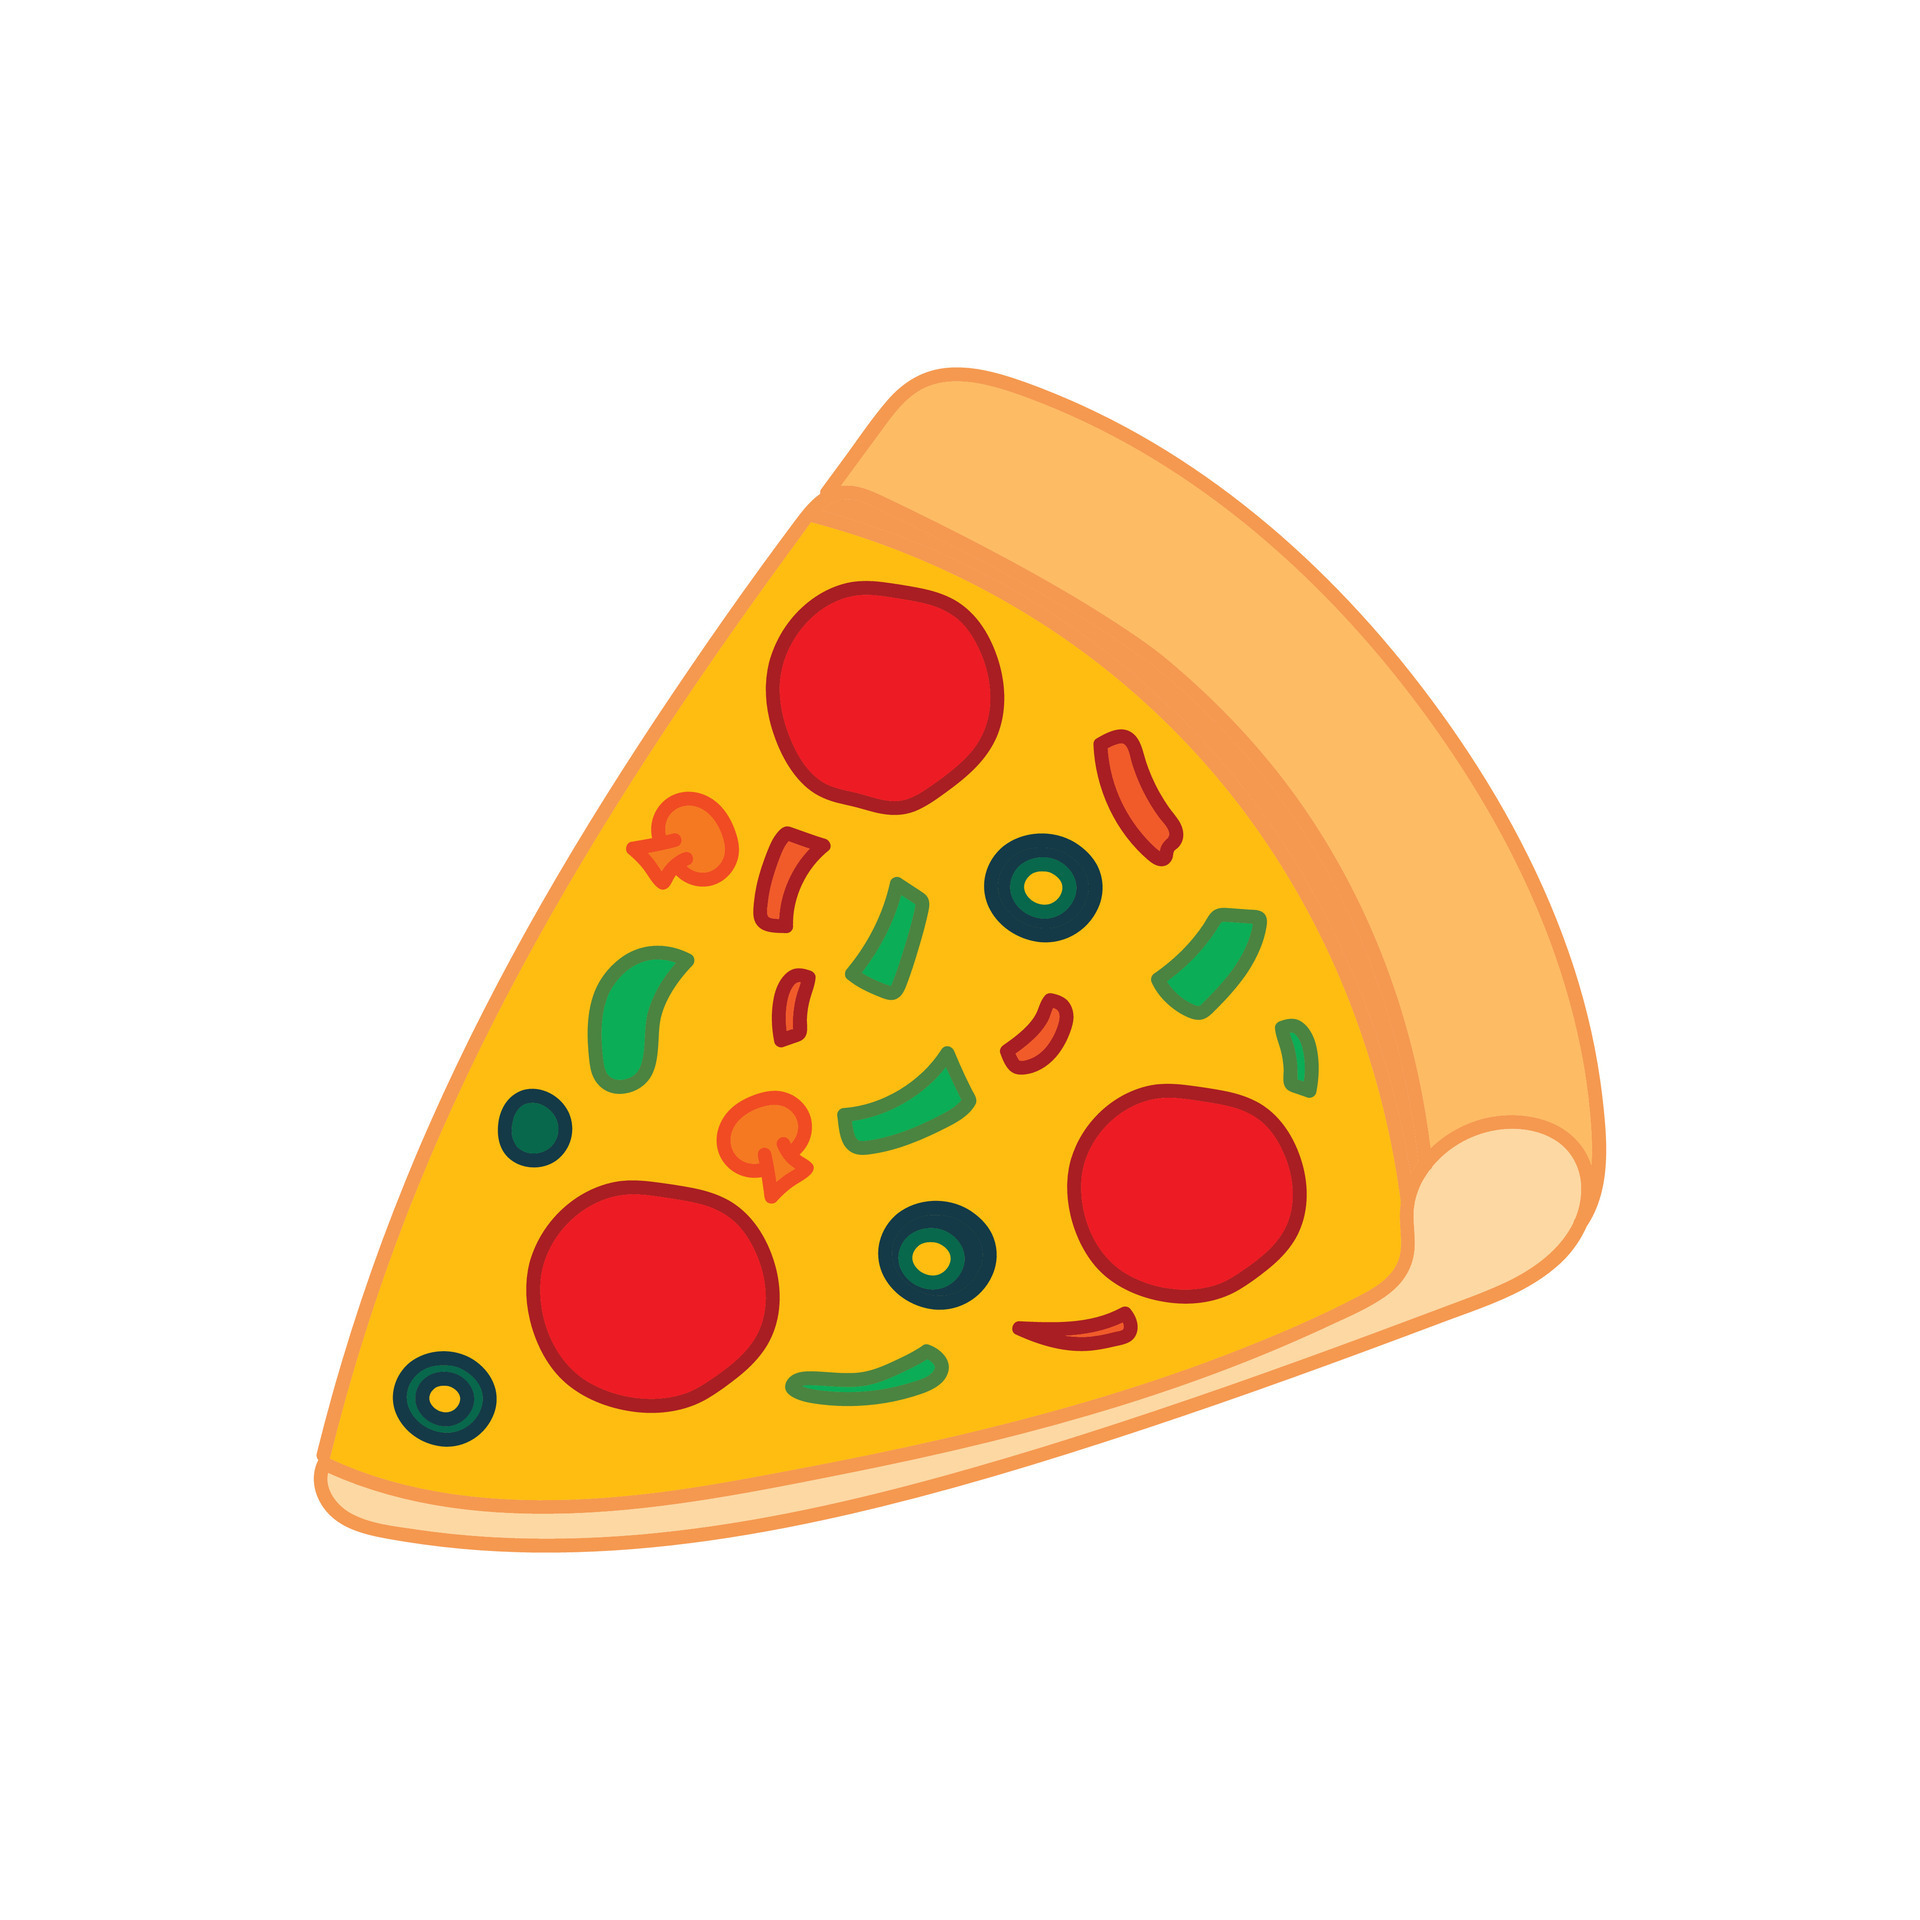 Hand drawn pizza slice in sketch style Royalty Free Vector